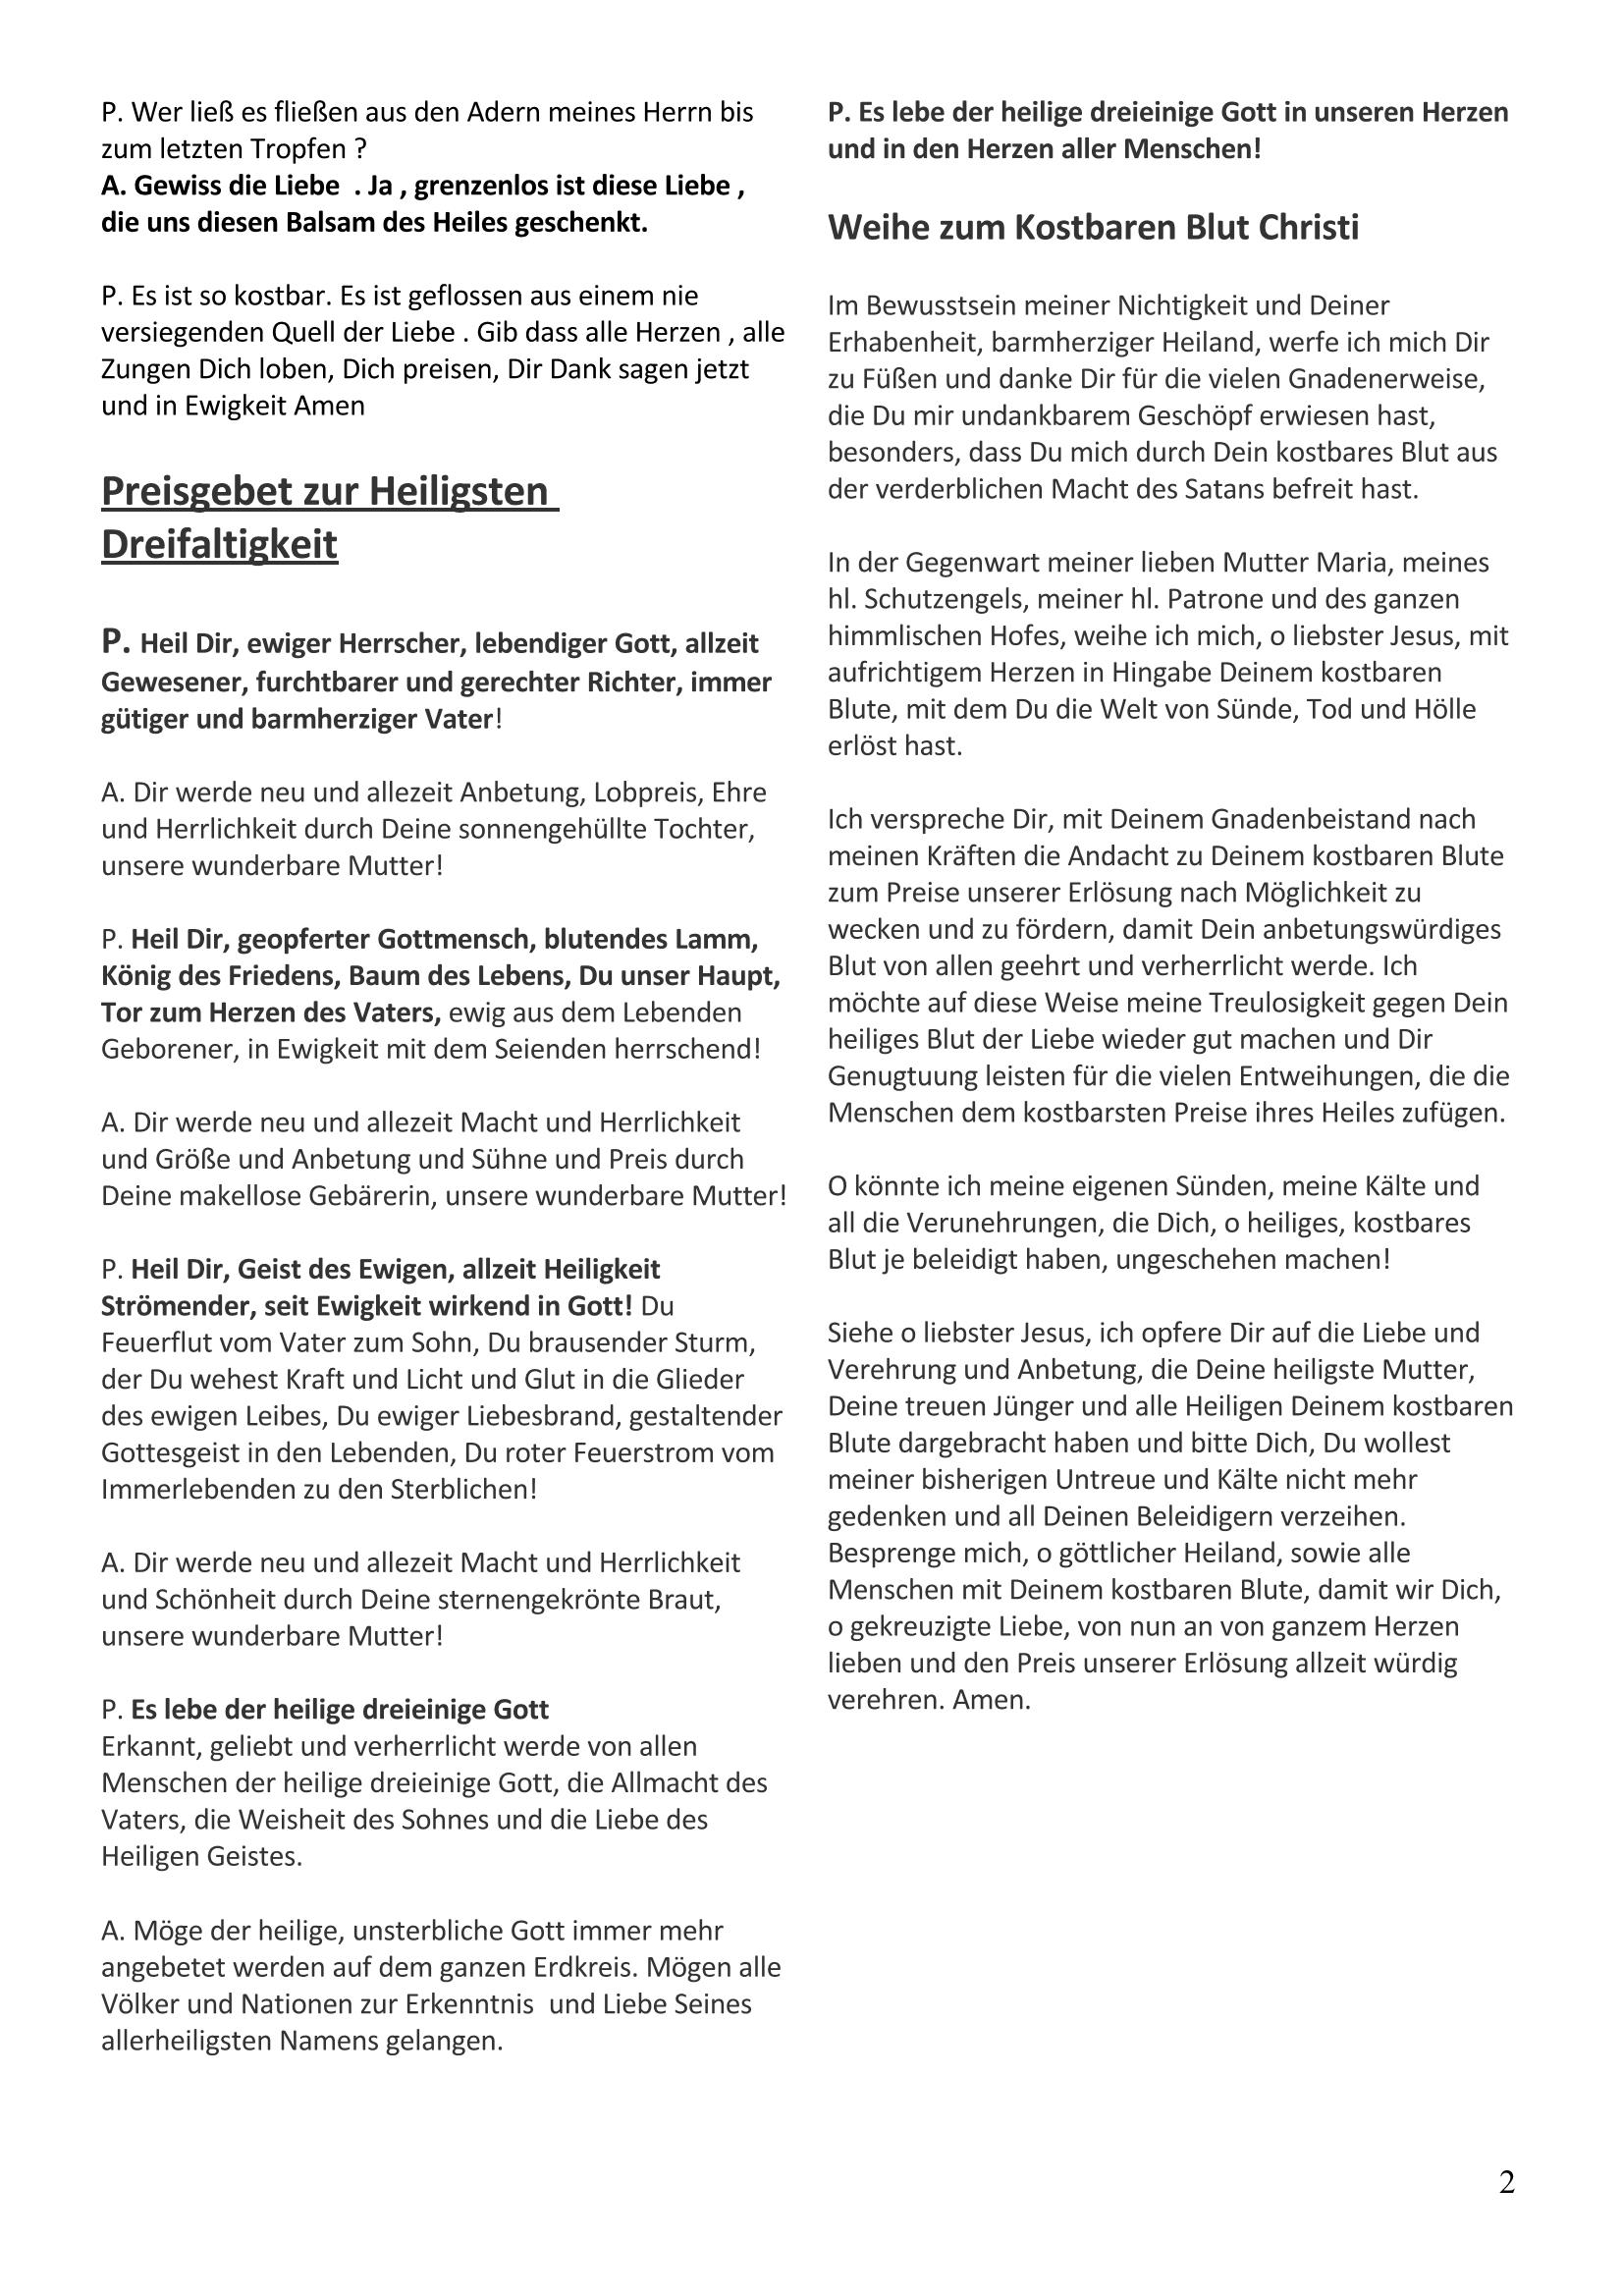 BetrachtungkostbarenBlutes Page 2